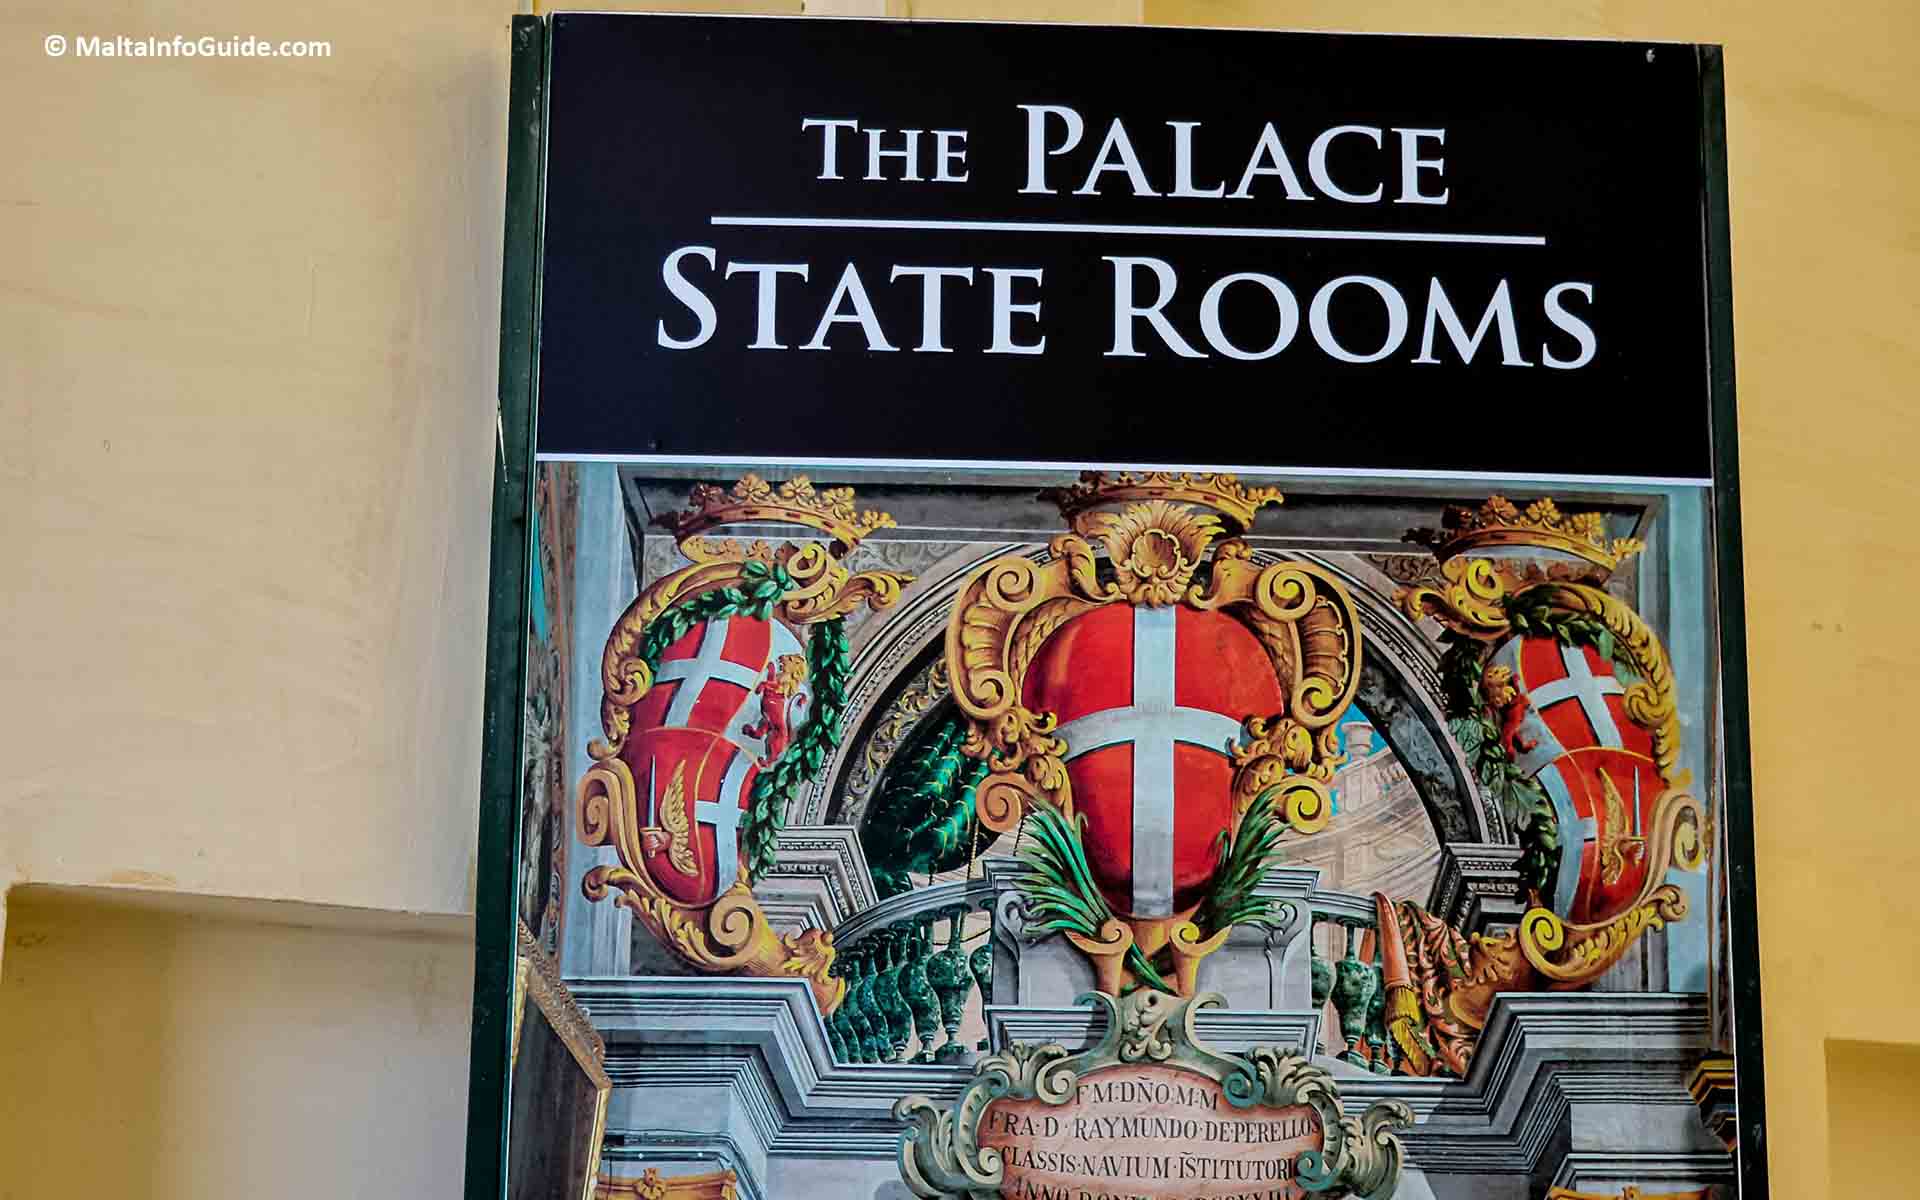 A sign of the Palace State Rooms before entrance at Valletta.